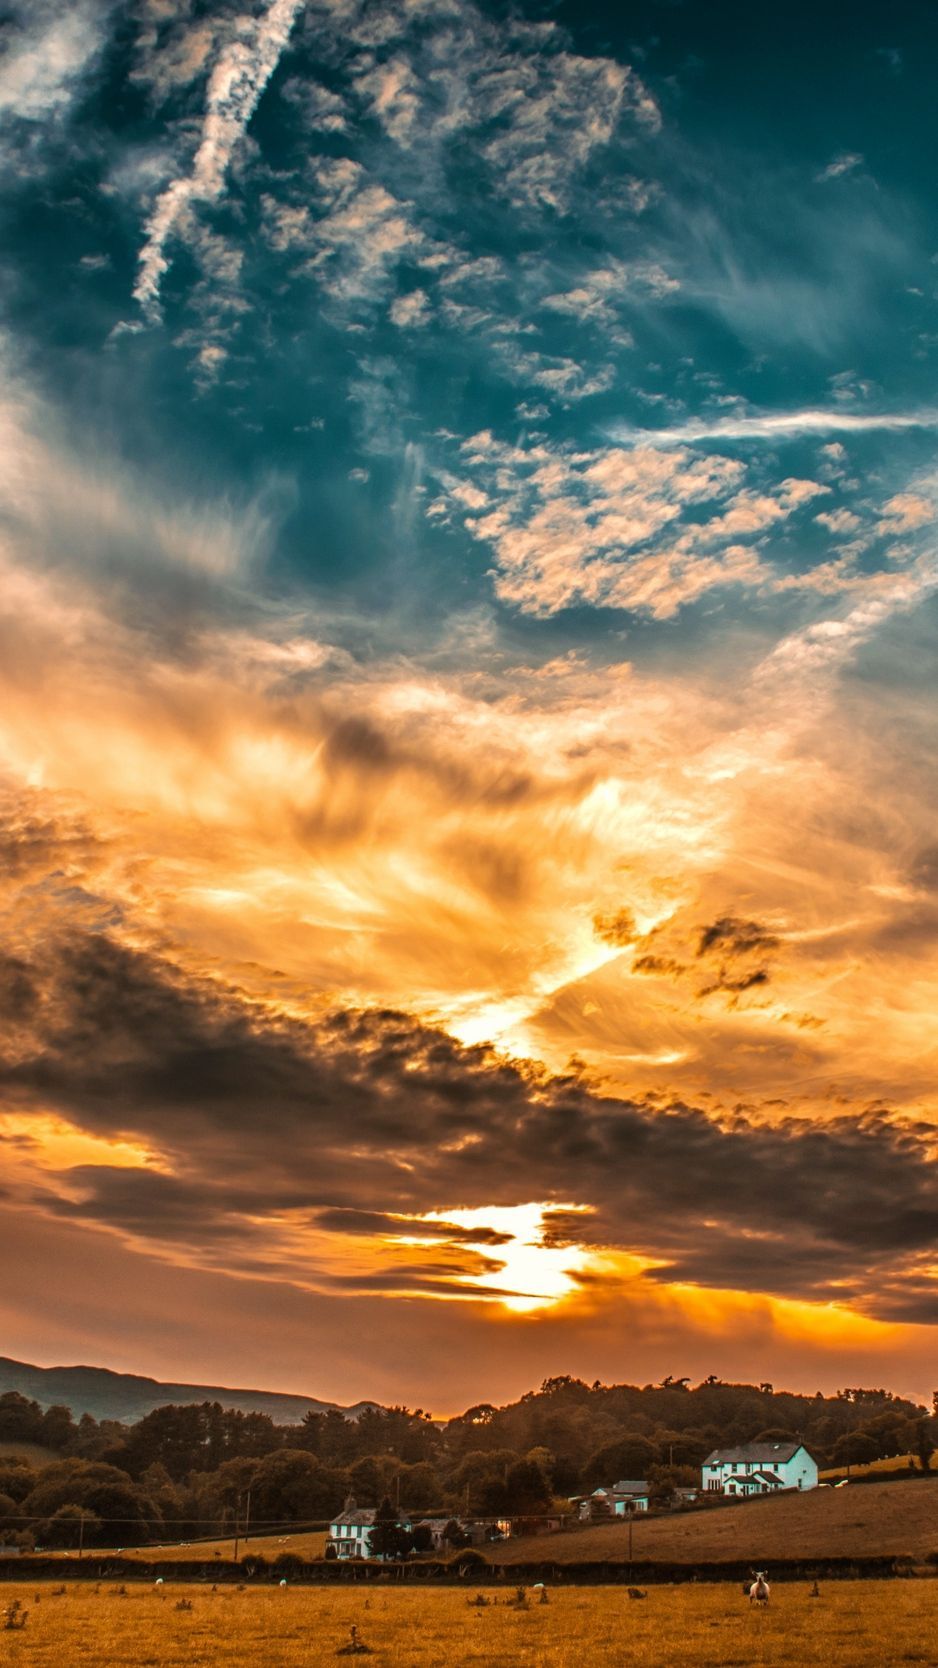 Beautiful Sunset Clouds Wallpapers Wallpaper Cave